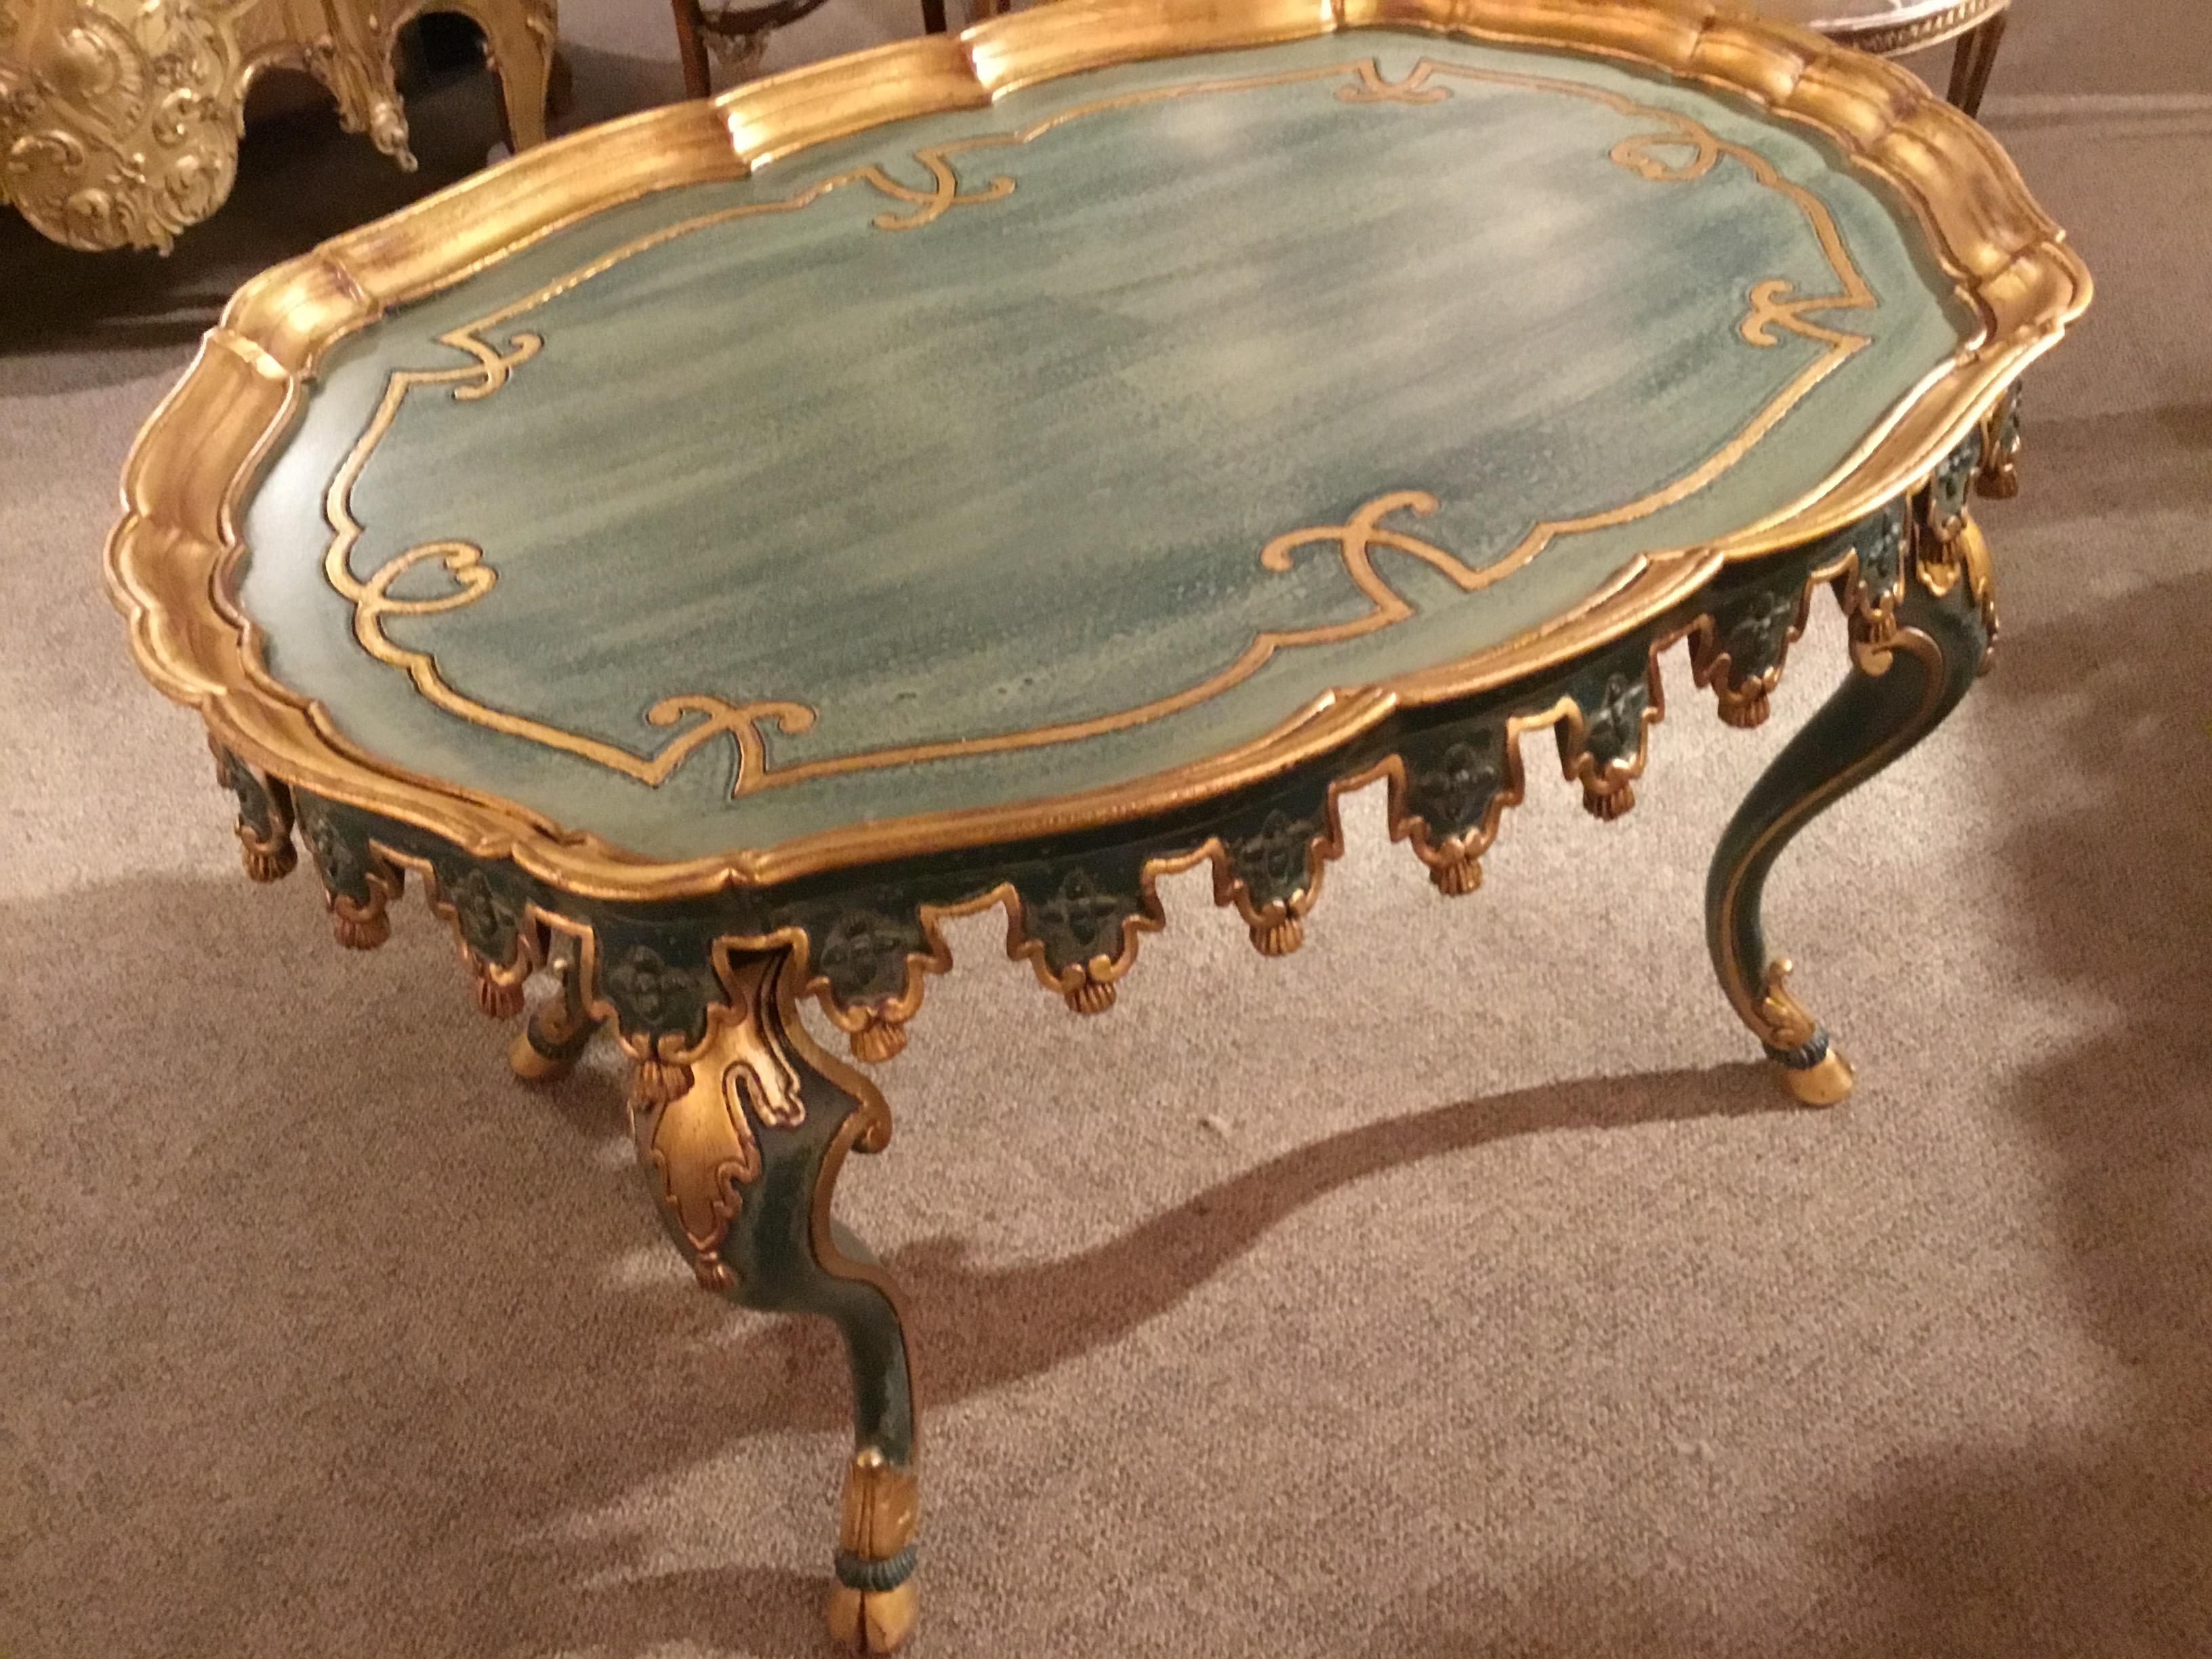 Hand-Painted Coffee or Cocktail Table, Italian, Oval Painted with Gold Gilt Trim